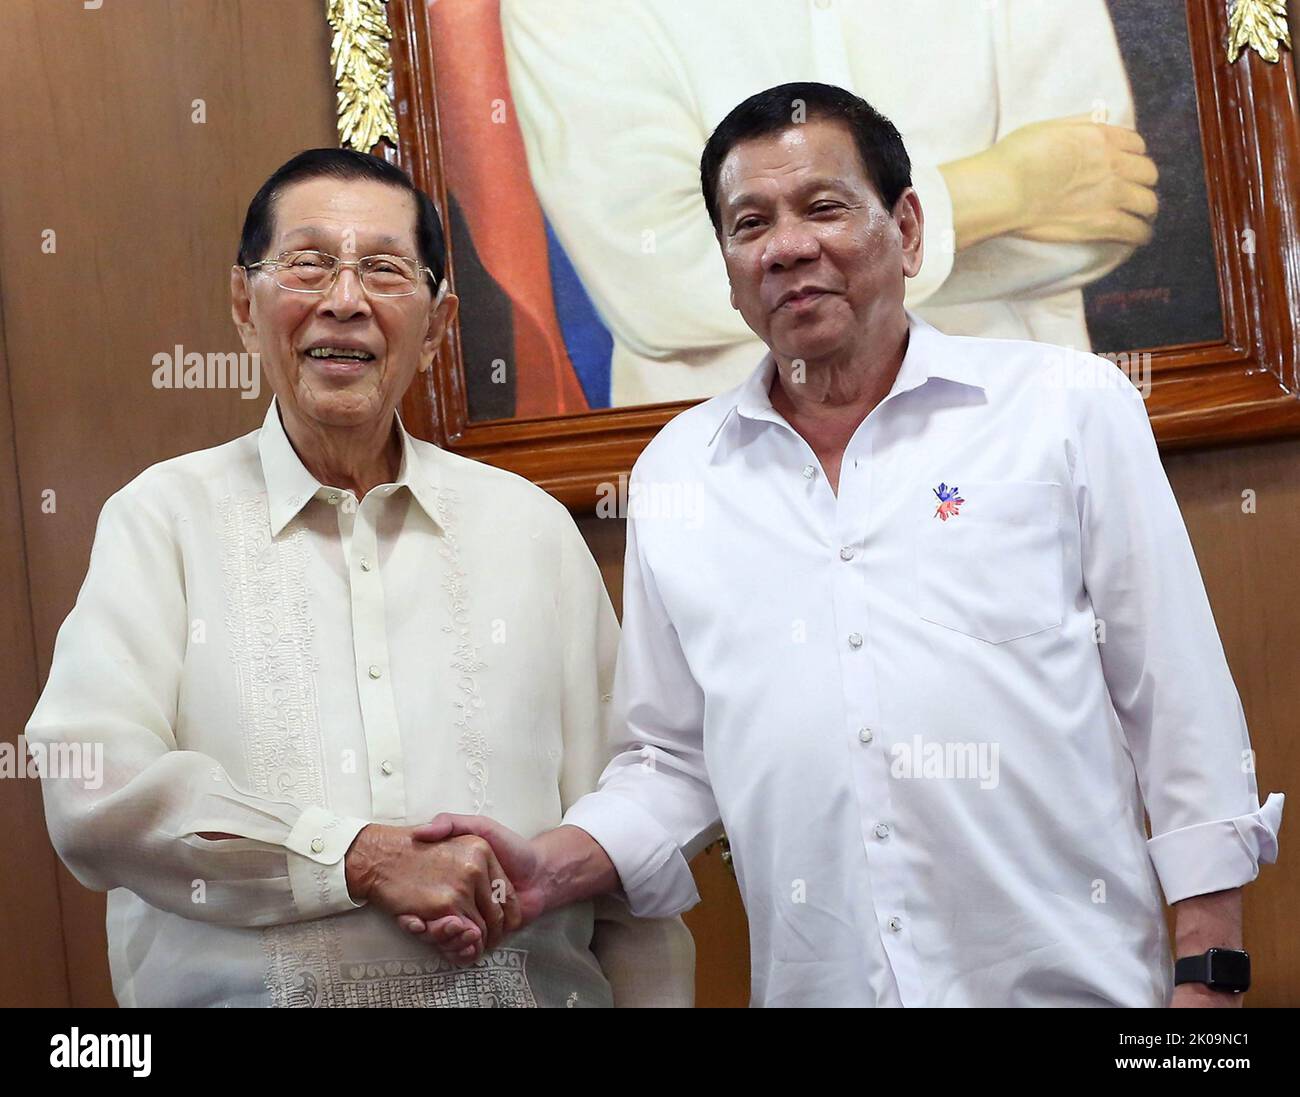 Phillipines President Rodrigo Roa Duterte shakes hands with former Senator Juan Ponce Enrile as they pose near the President's portrait following their meeting in Malacanan Palace on March 1, 2017. Stock Photo